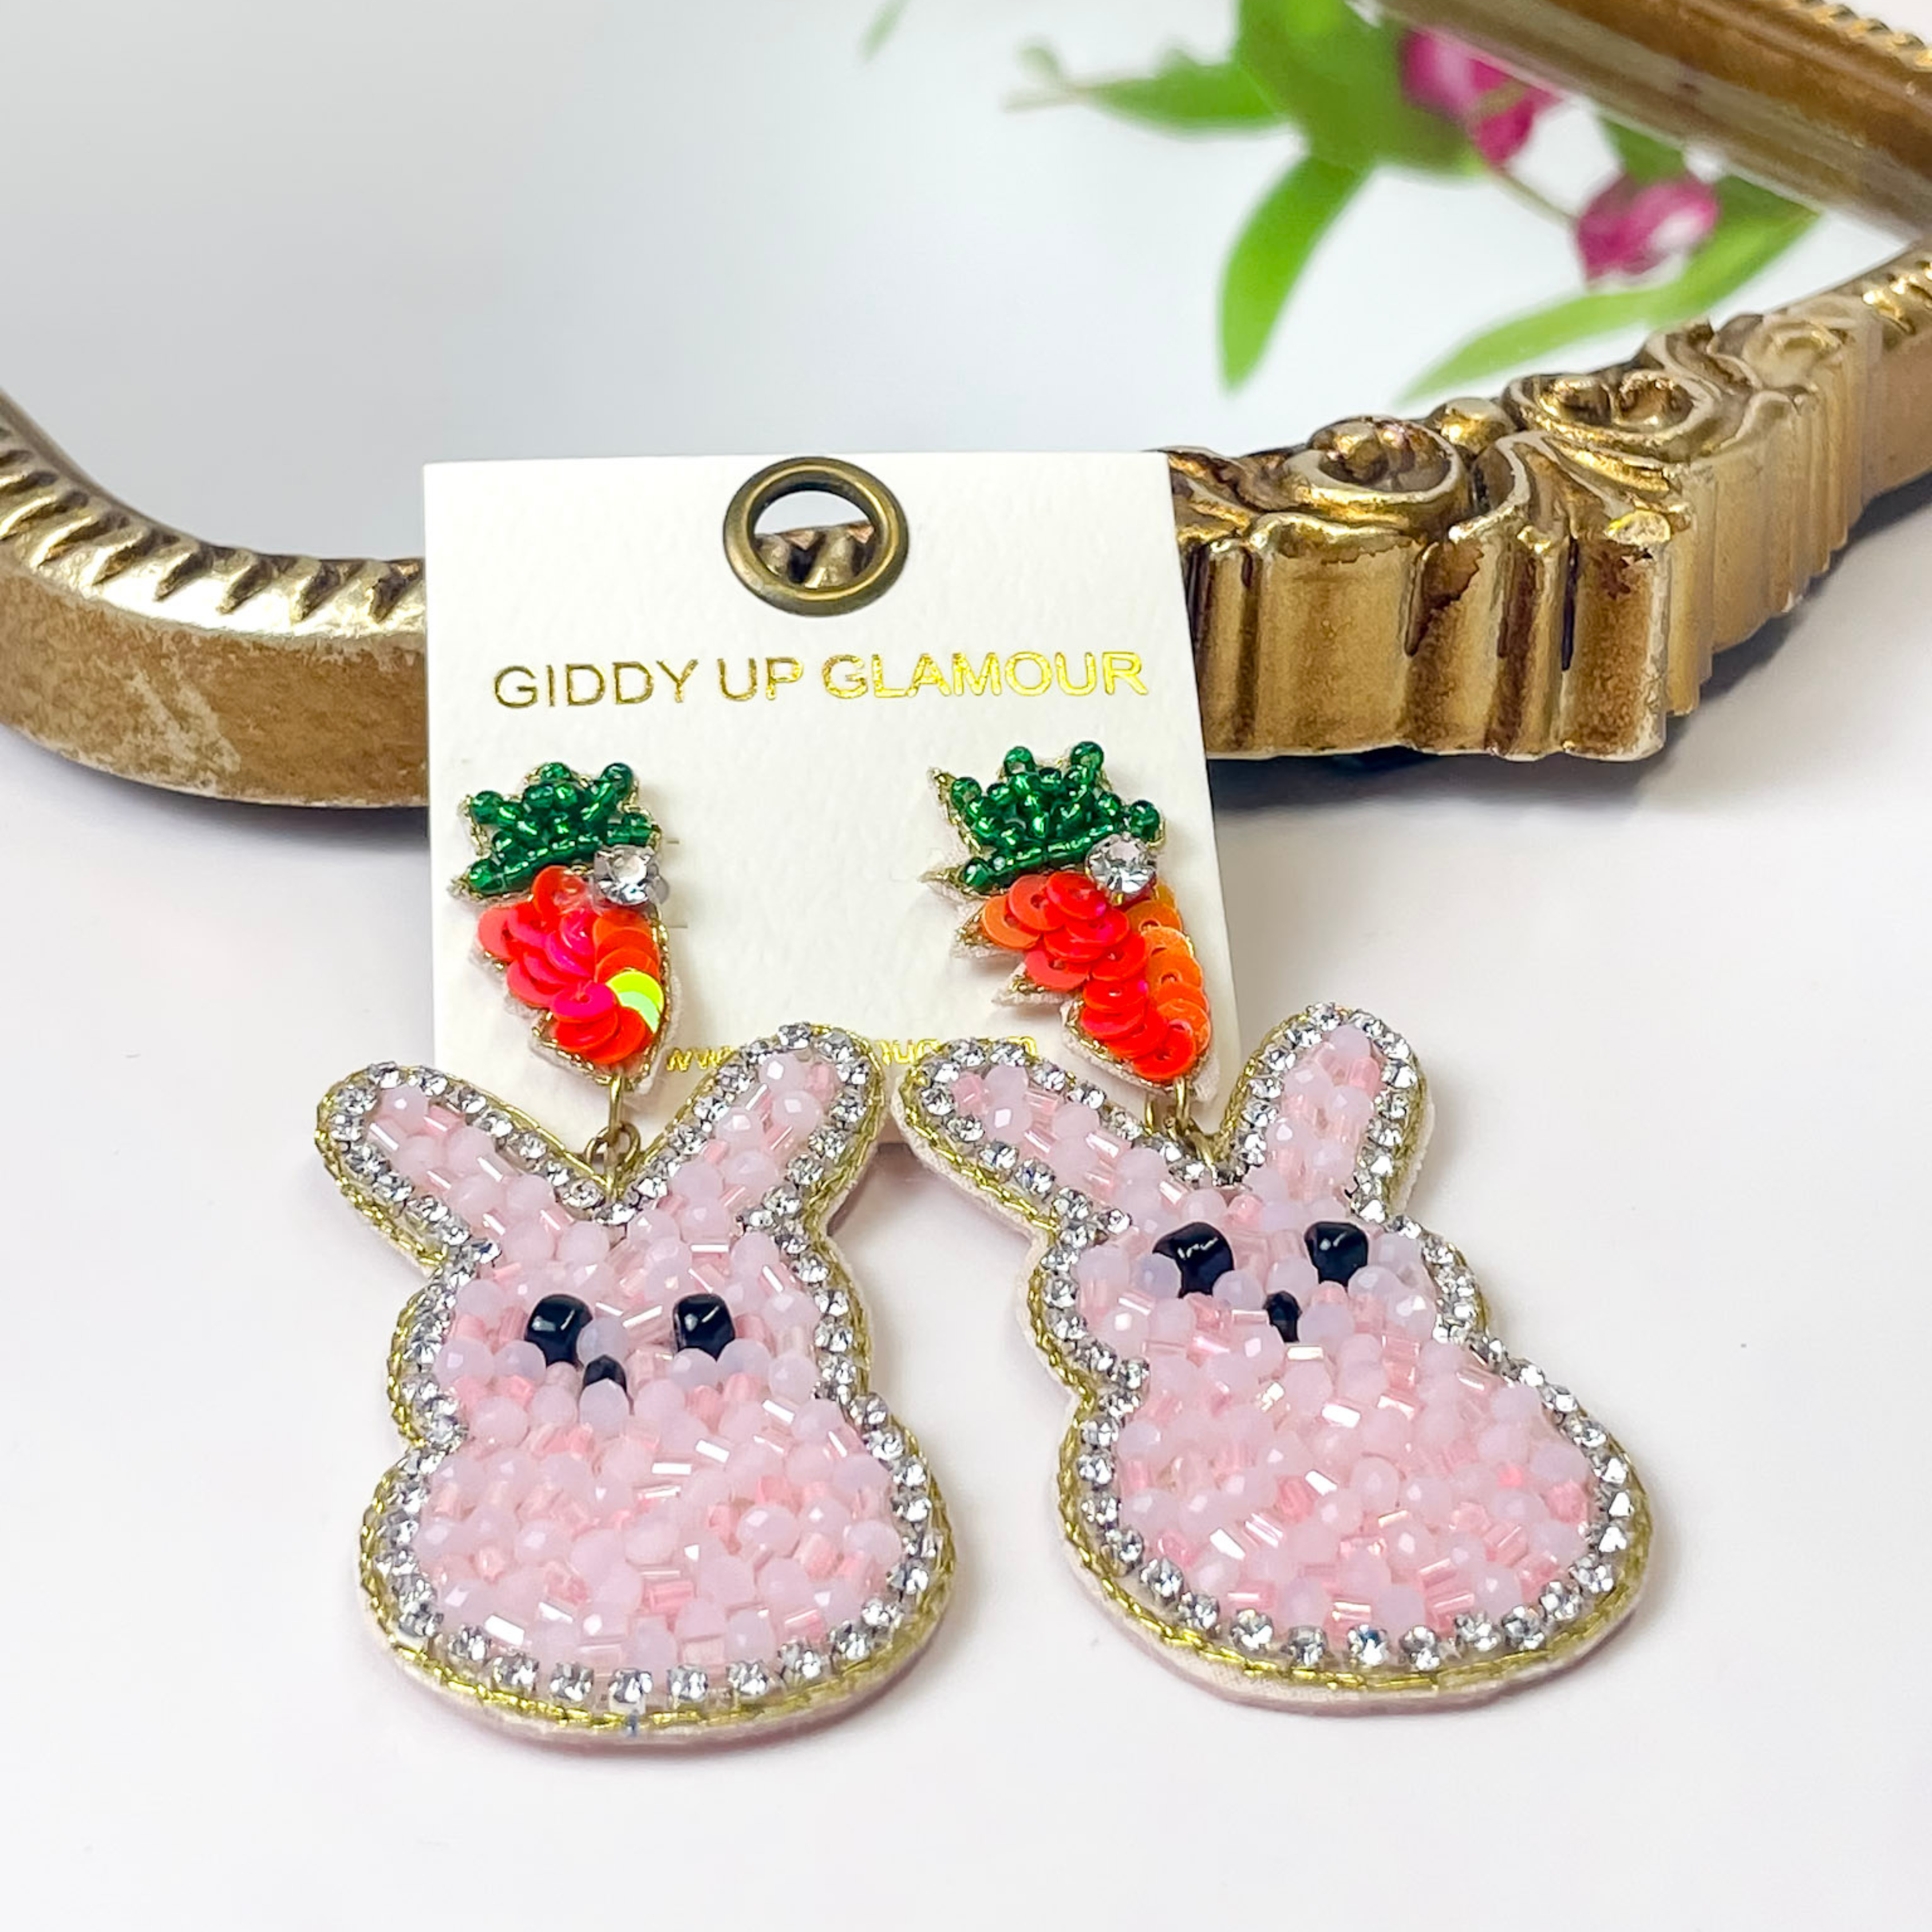 Bunny Beaded Earrings in Pink - Giddy Up Glamour Boutique